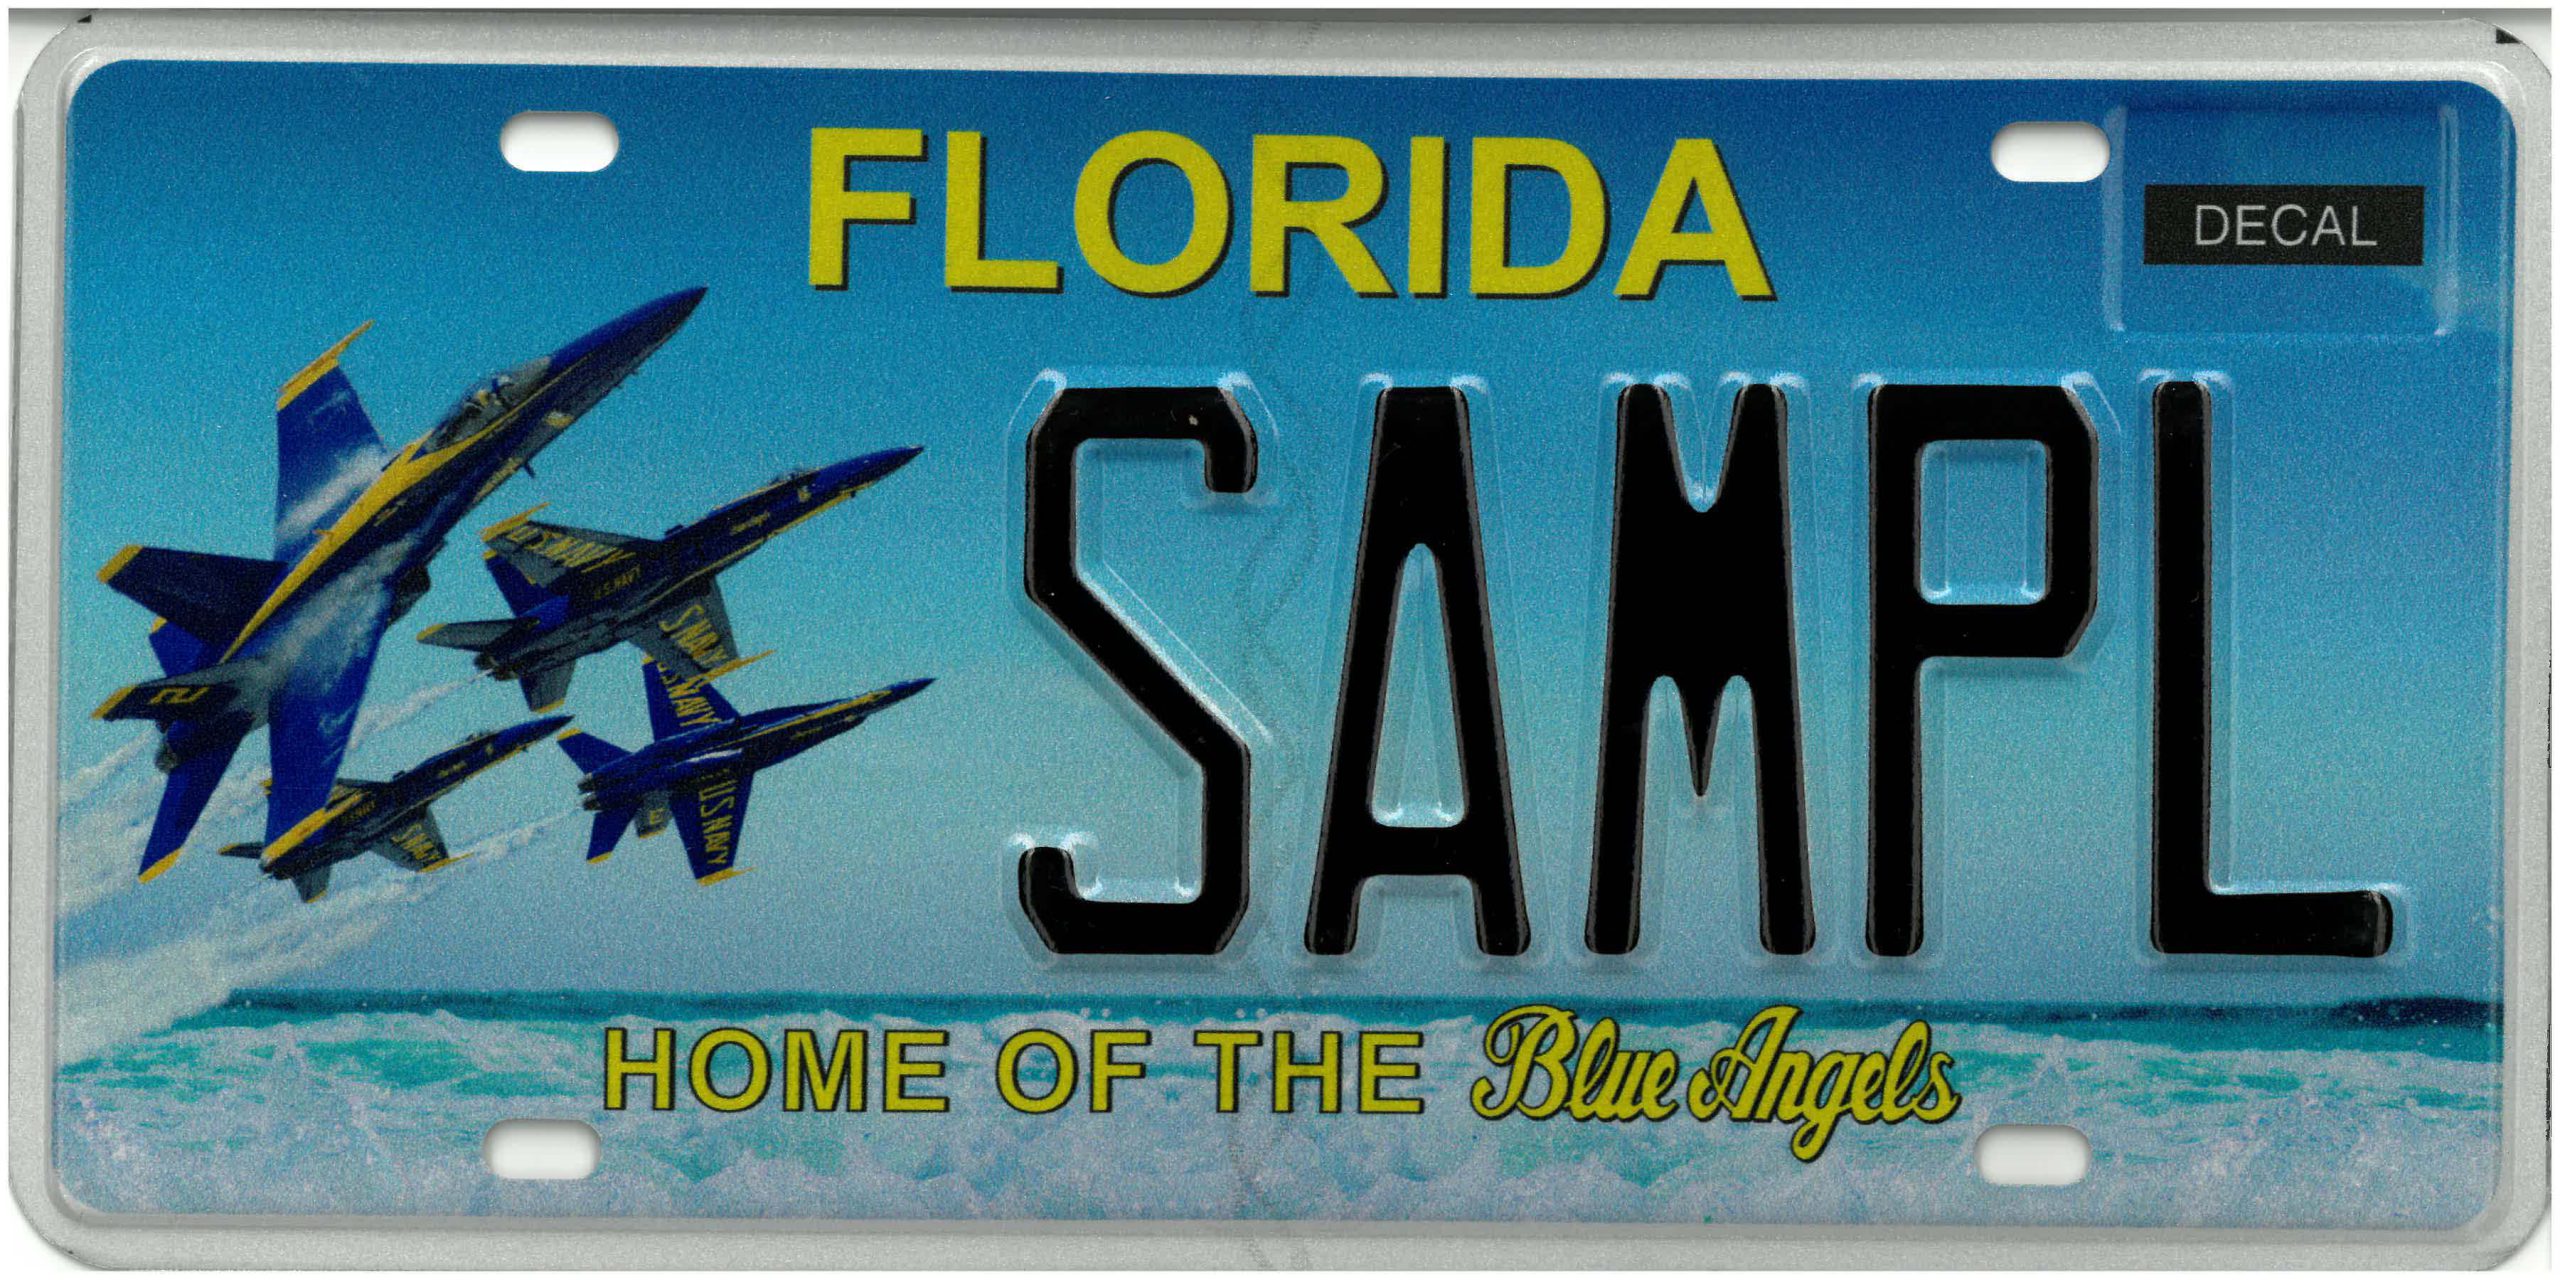 New Specialty License Plate in Florida Cleared for Takeoff Florida